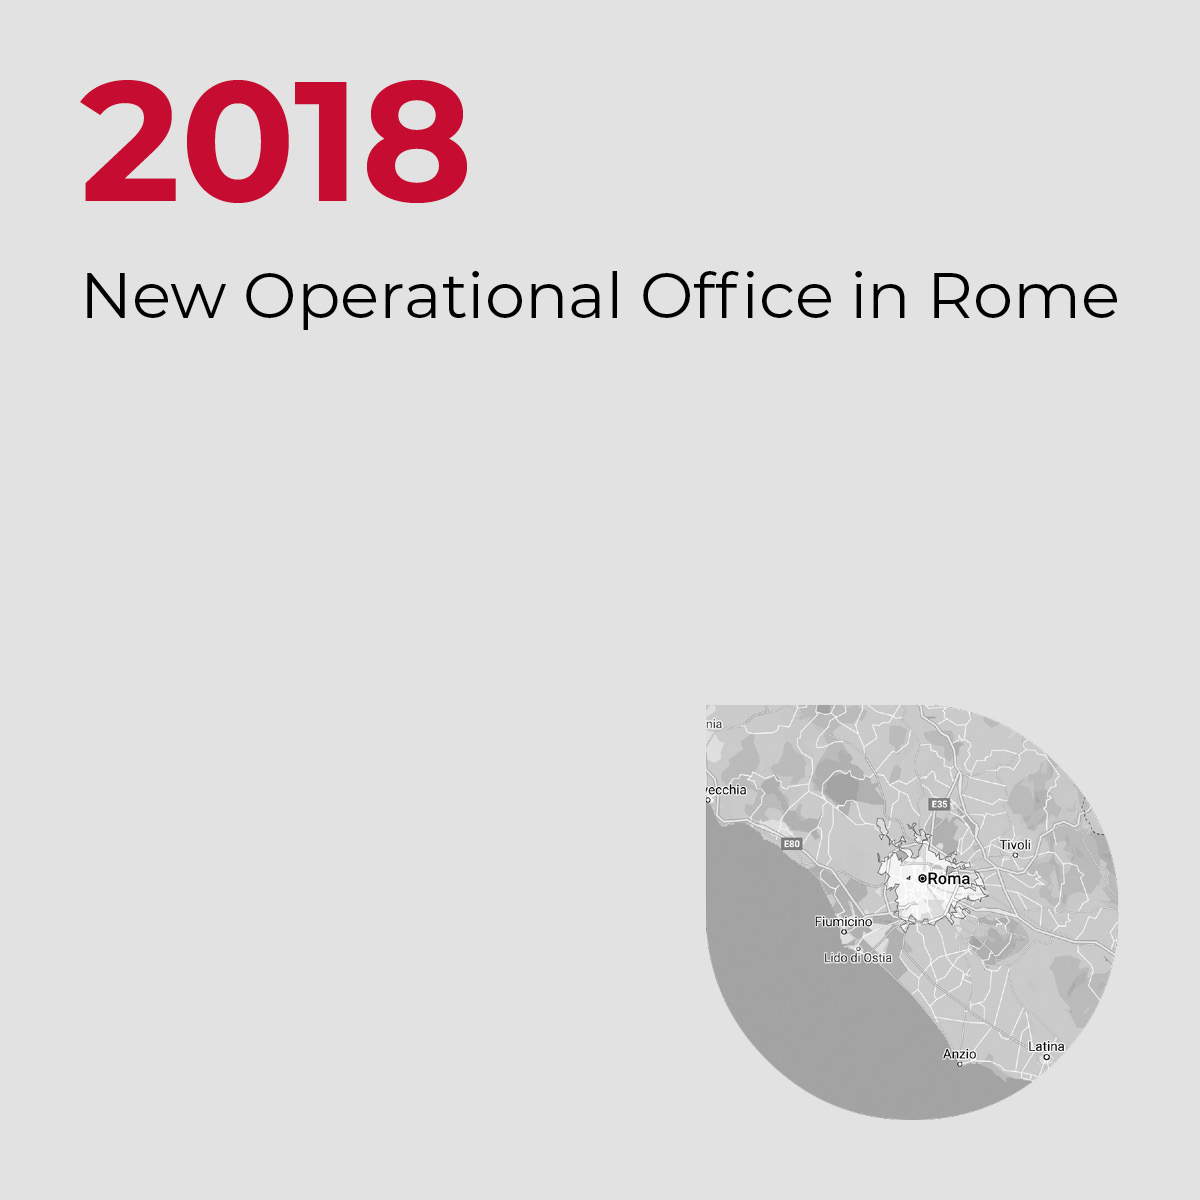 2018, New Operational Office in Rome